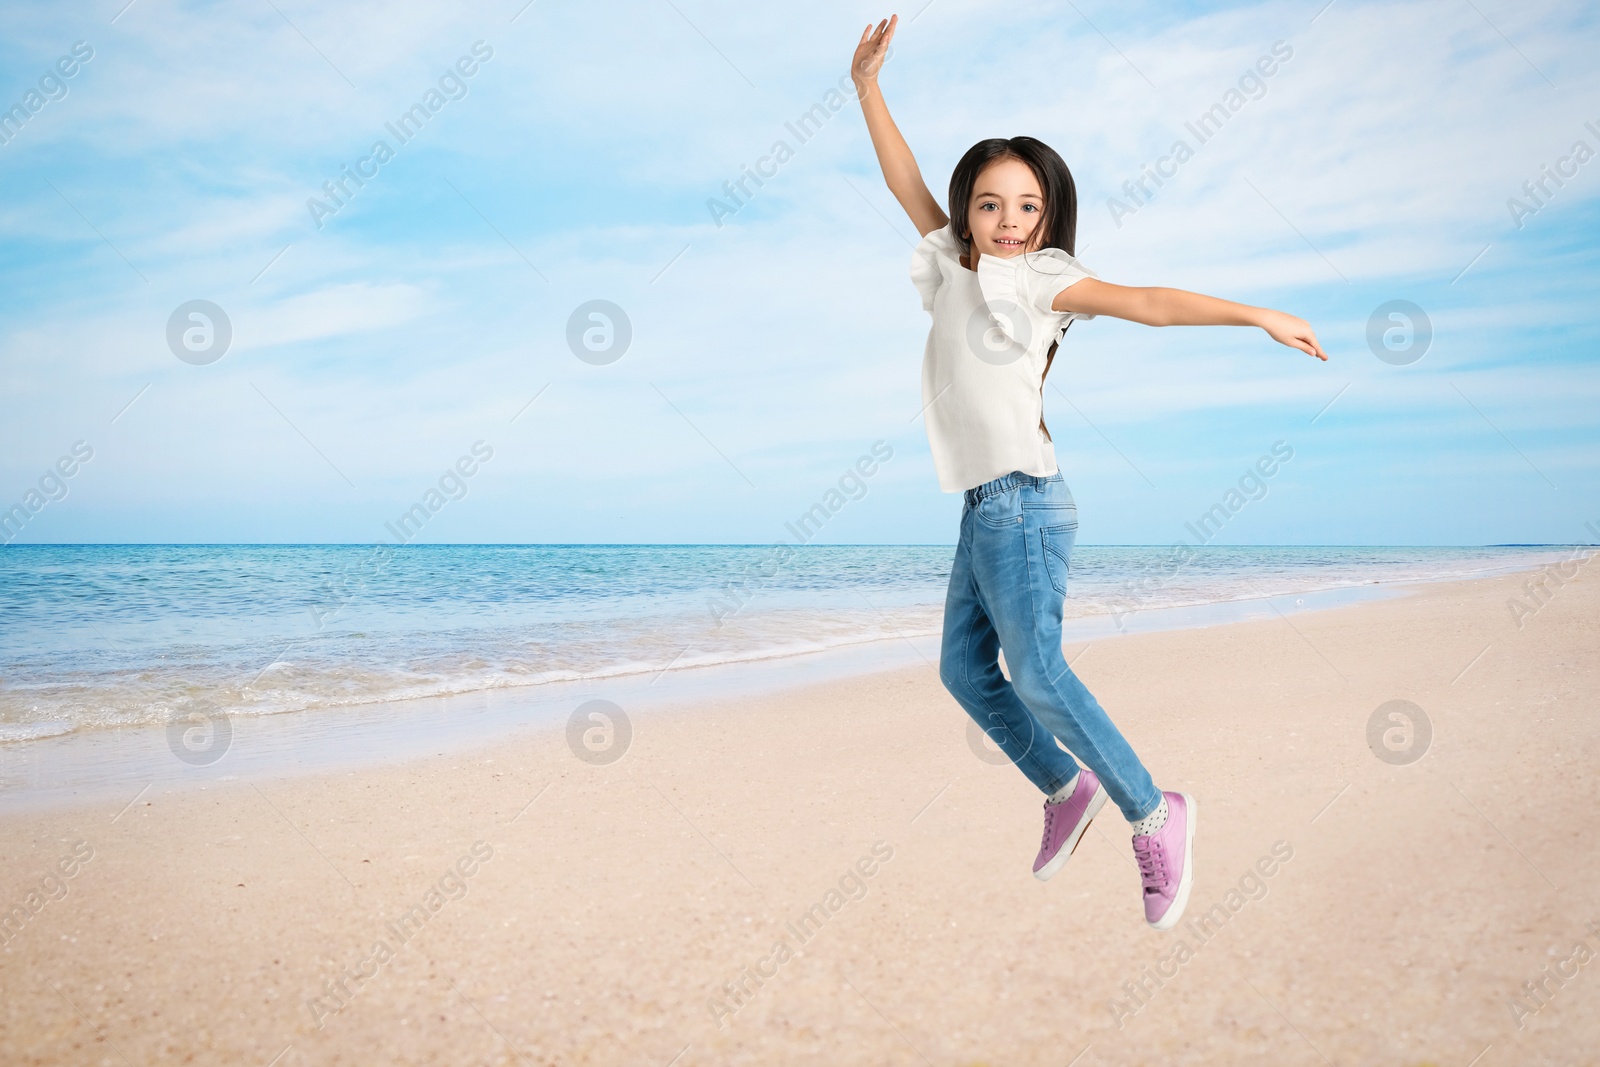 Image of Cute school girl jumping on beach near sea, space for text. Summer holidays